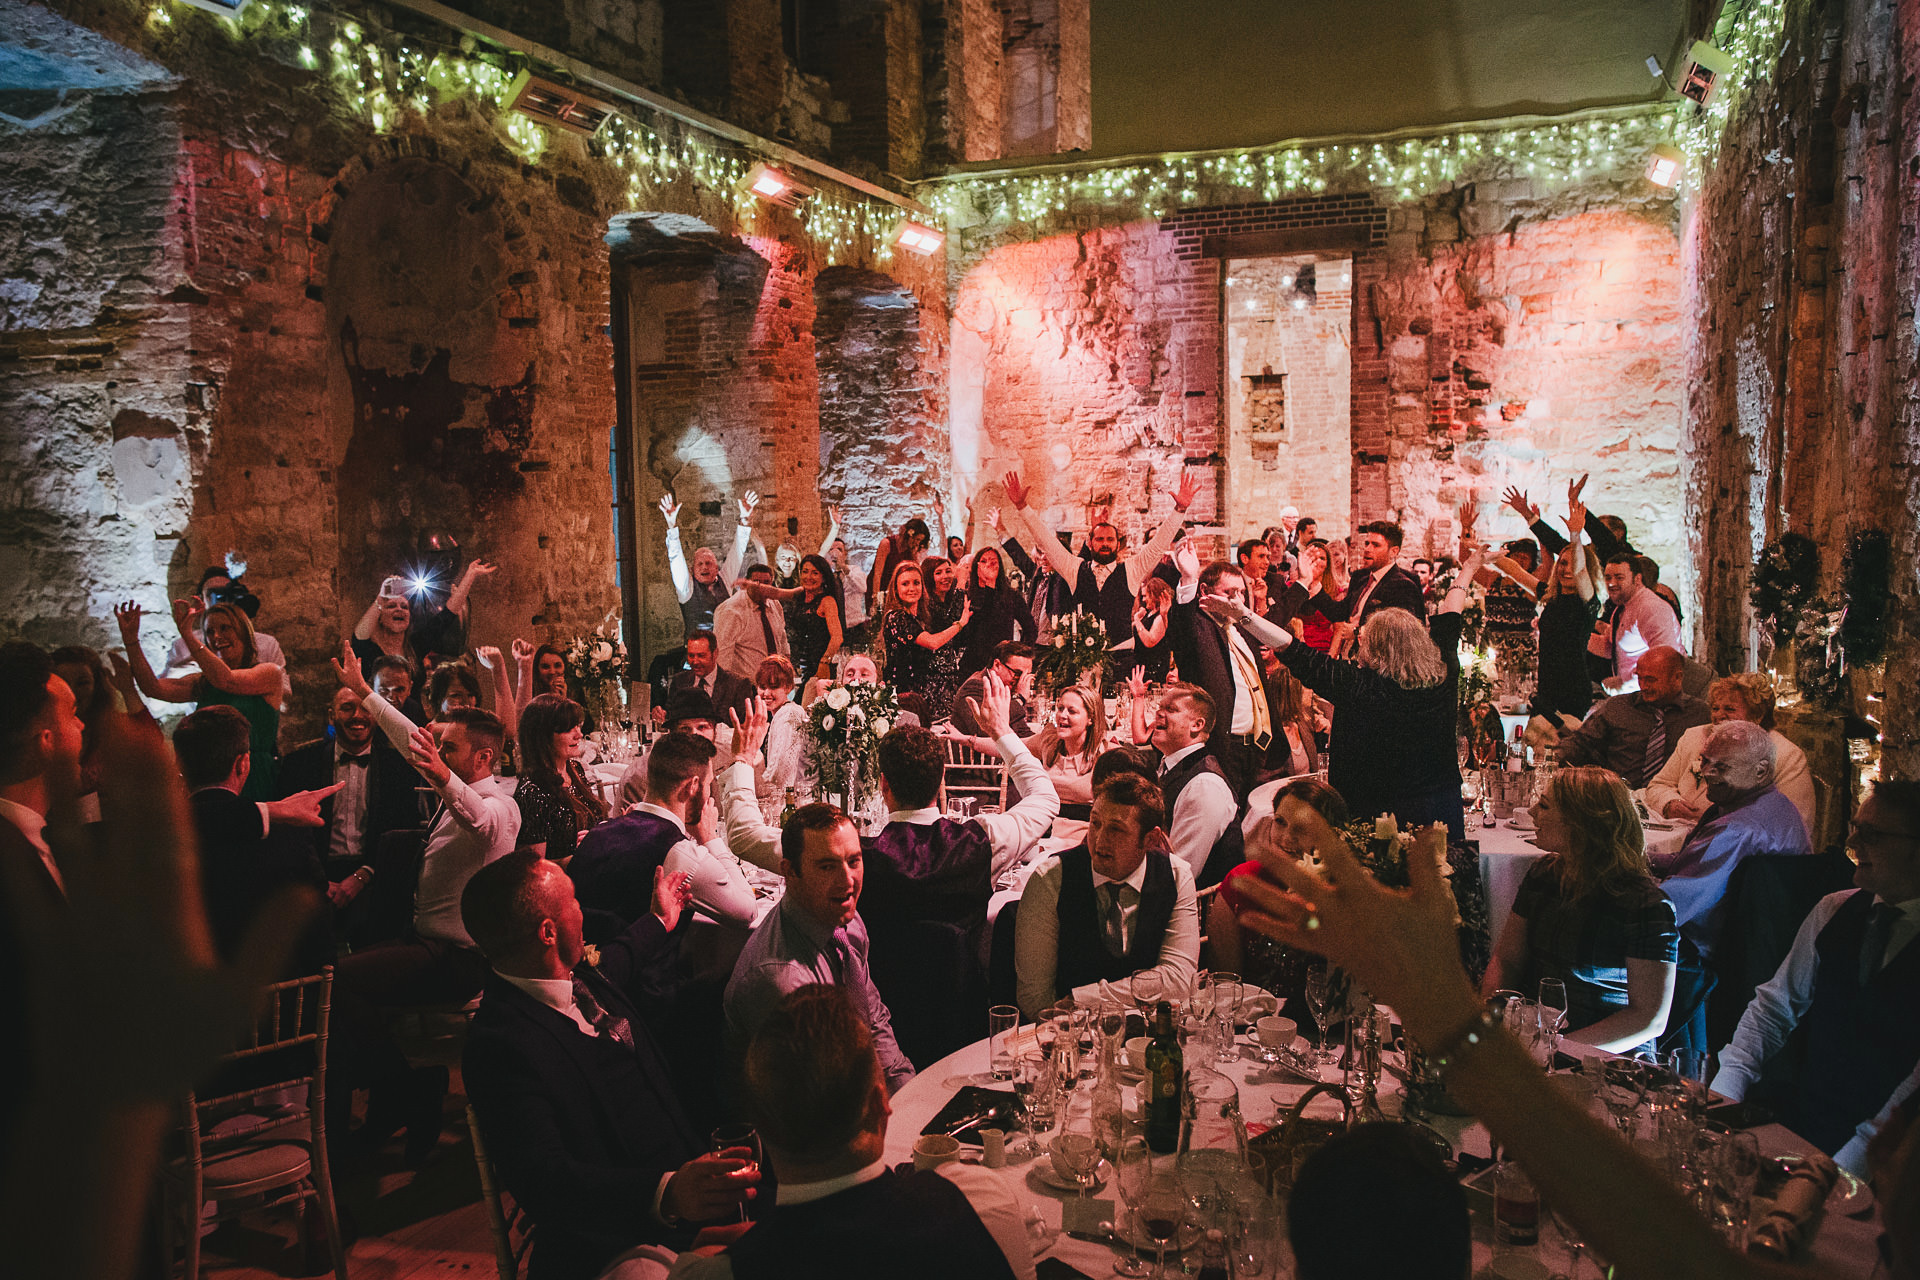 A winter wedding at Lulworth Castle, with a room full of wedding guests singing Christmas Carols at their tables